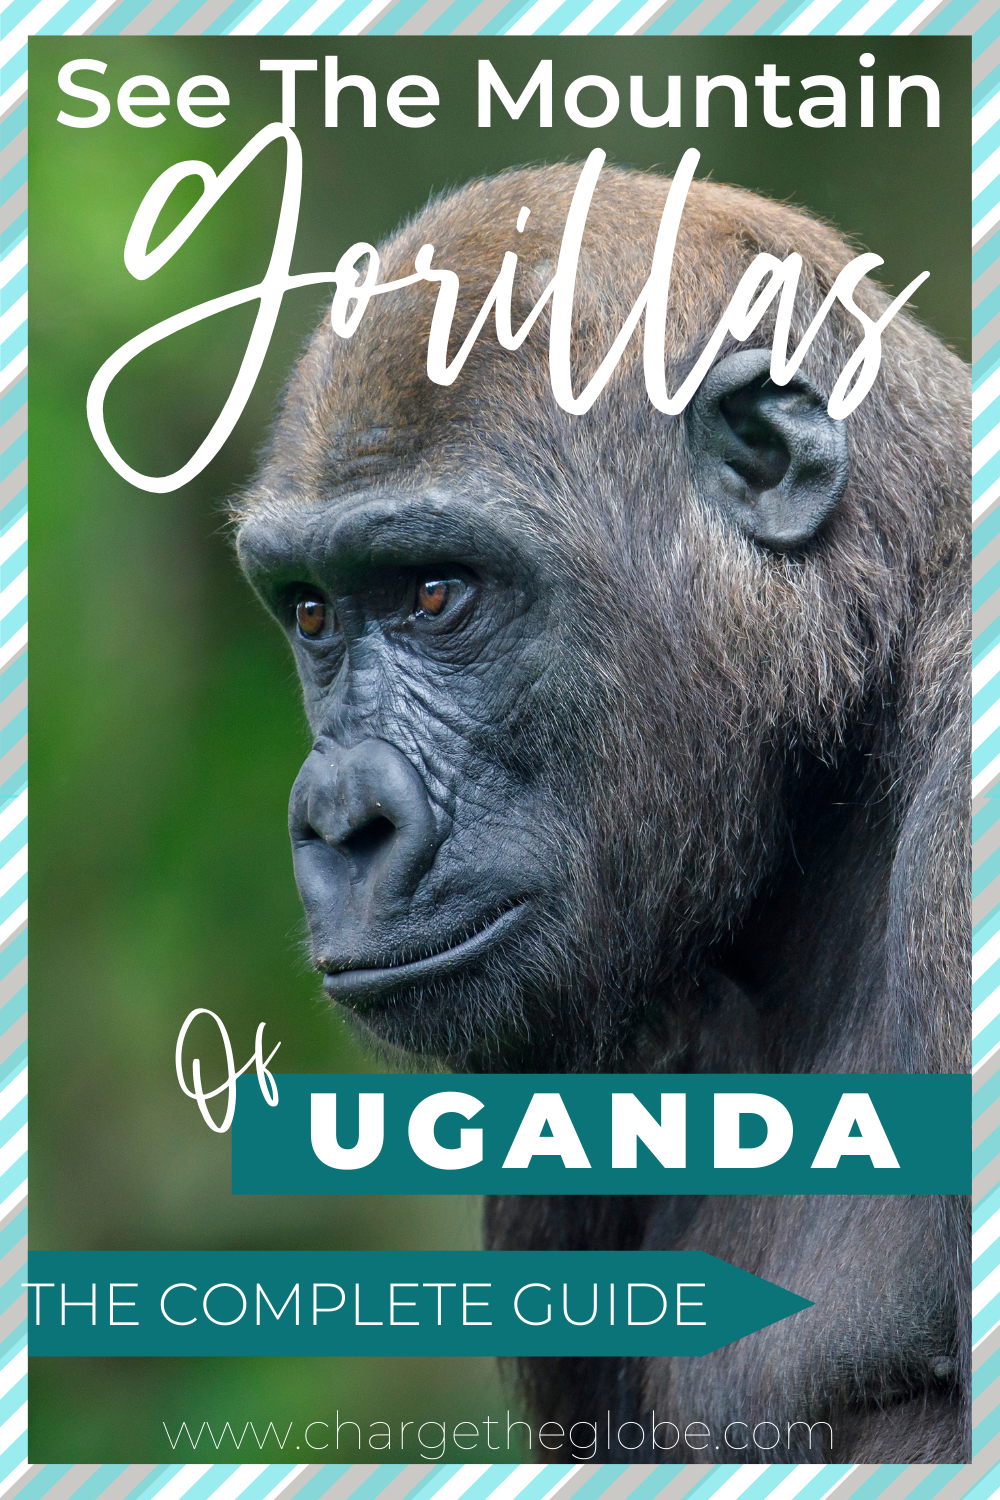 PIN ME! The Complete guide to visiting the mountain gorillas of Bwindi Impenetrable Forest